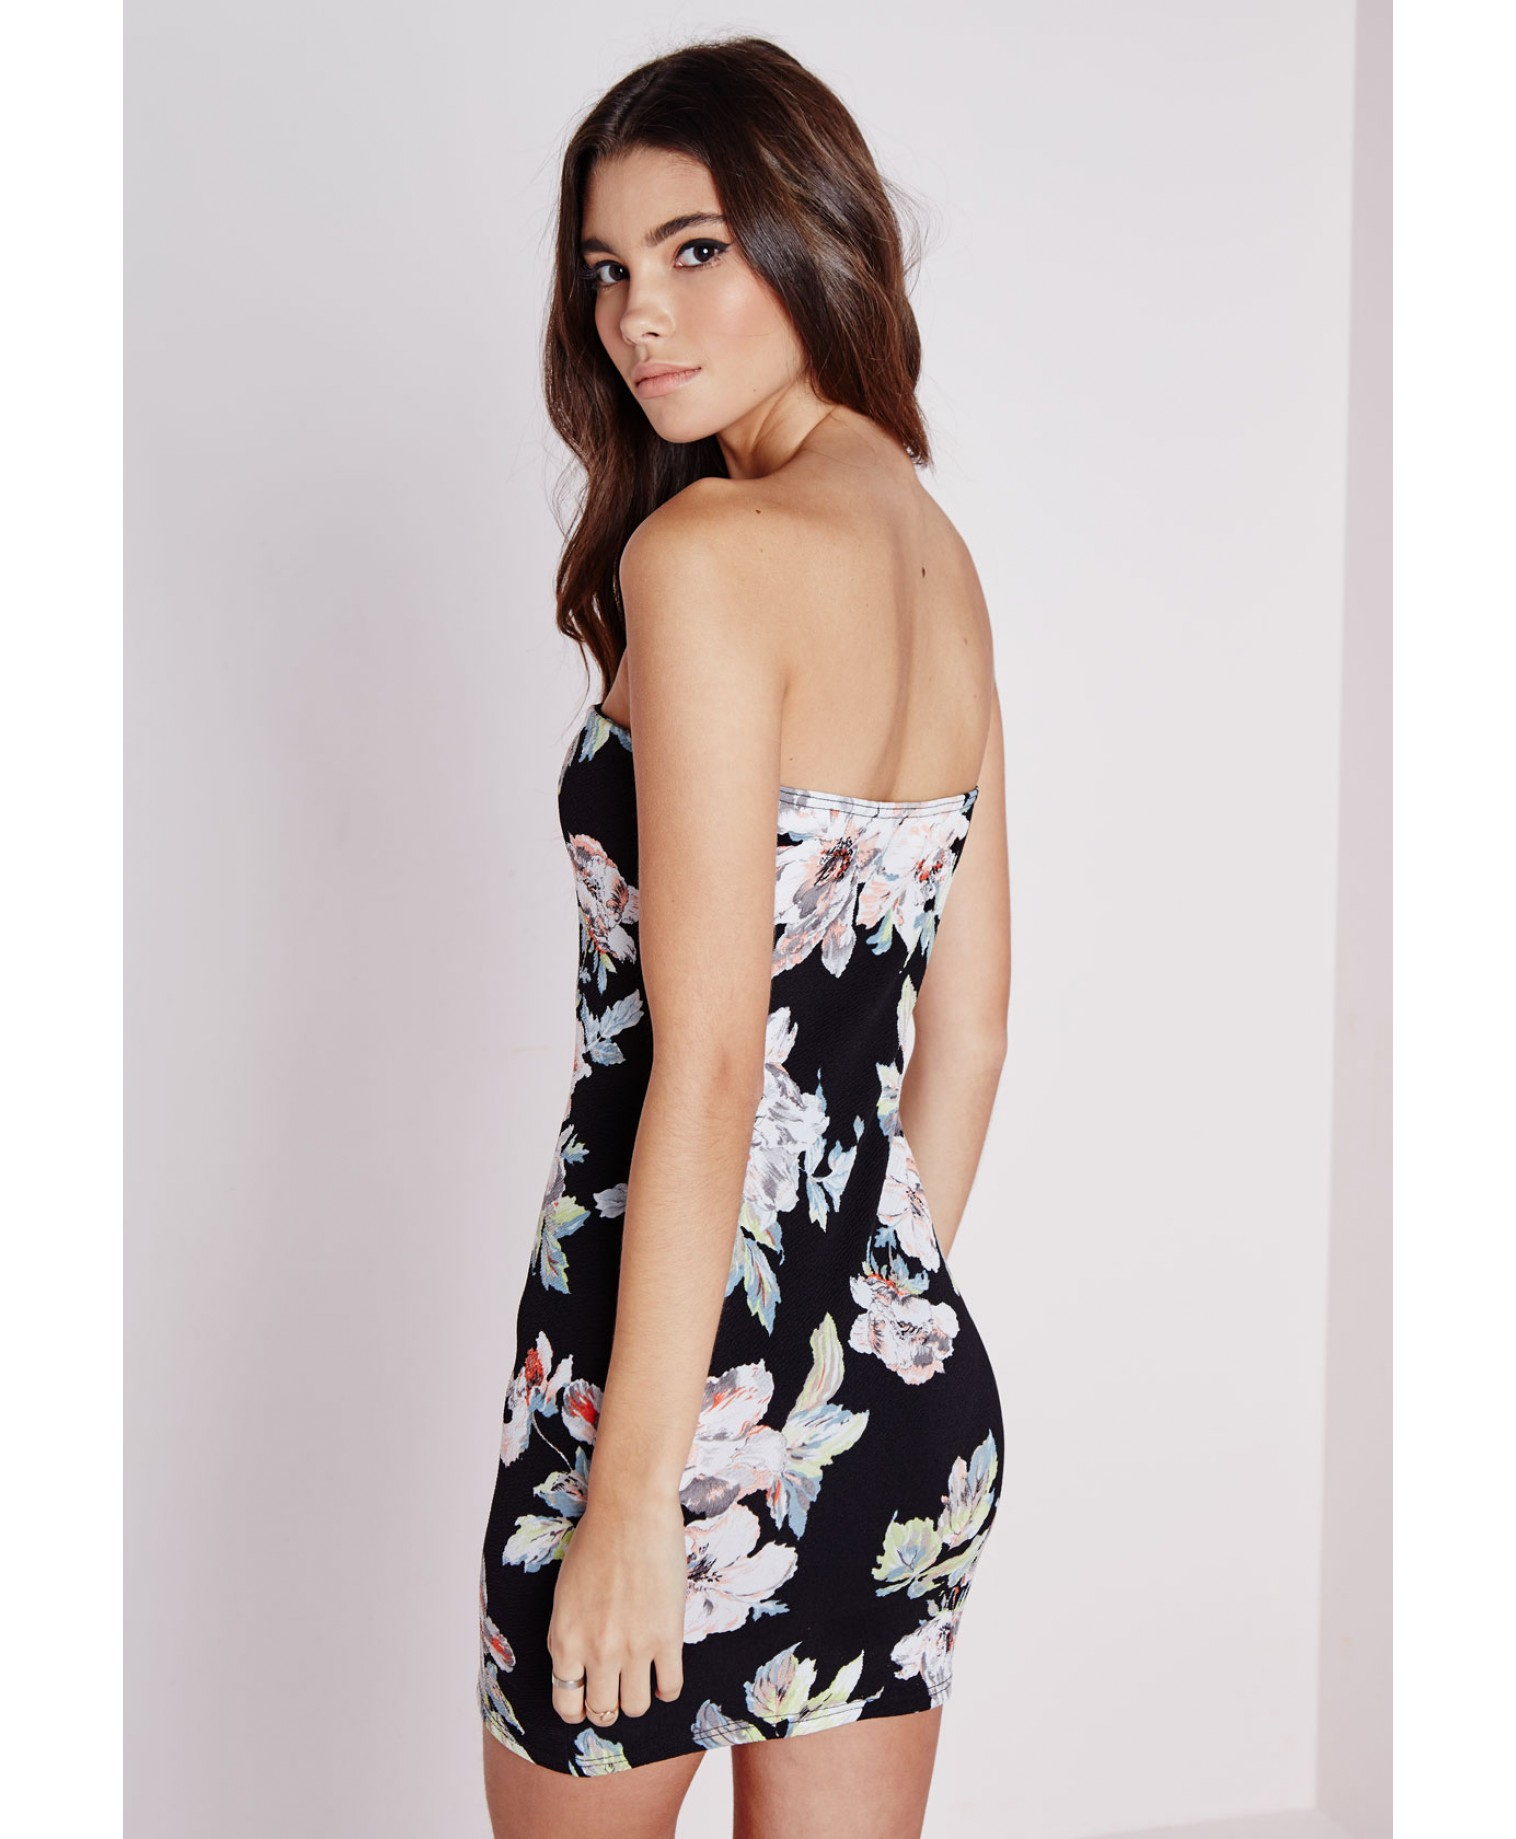 Lyst - Missguided Strapless Bodycon Dress Black Floral in Black